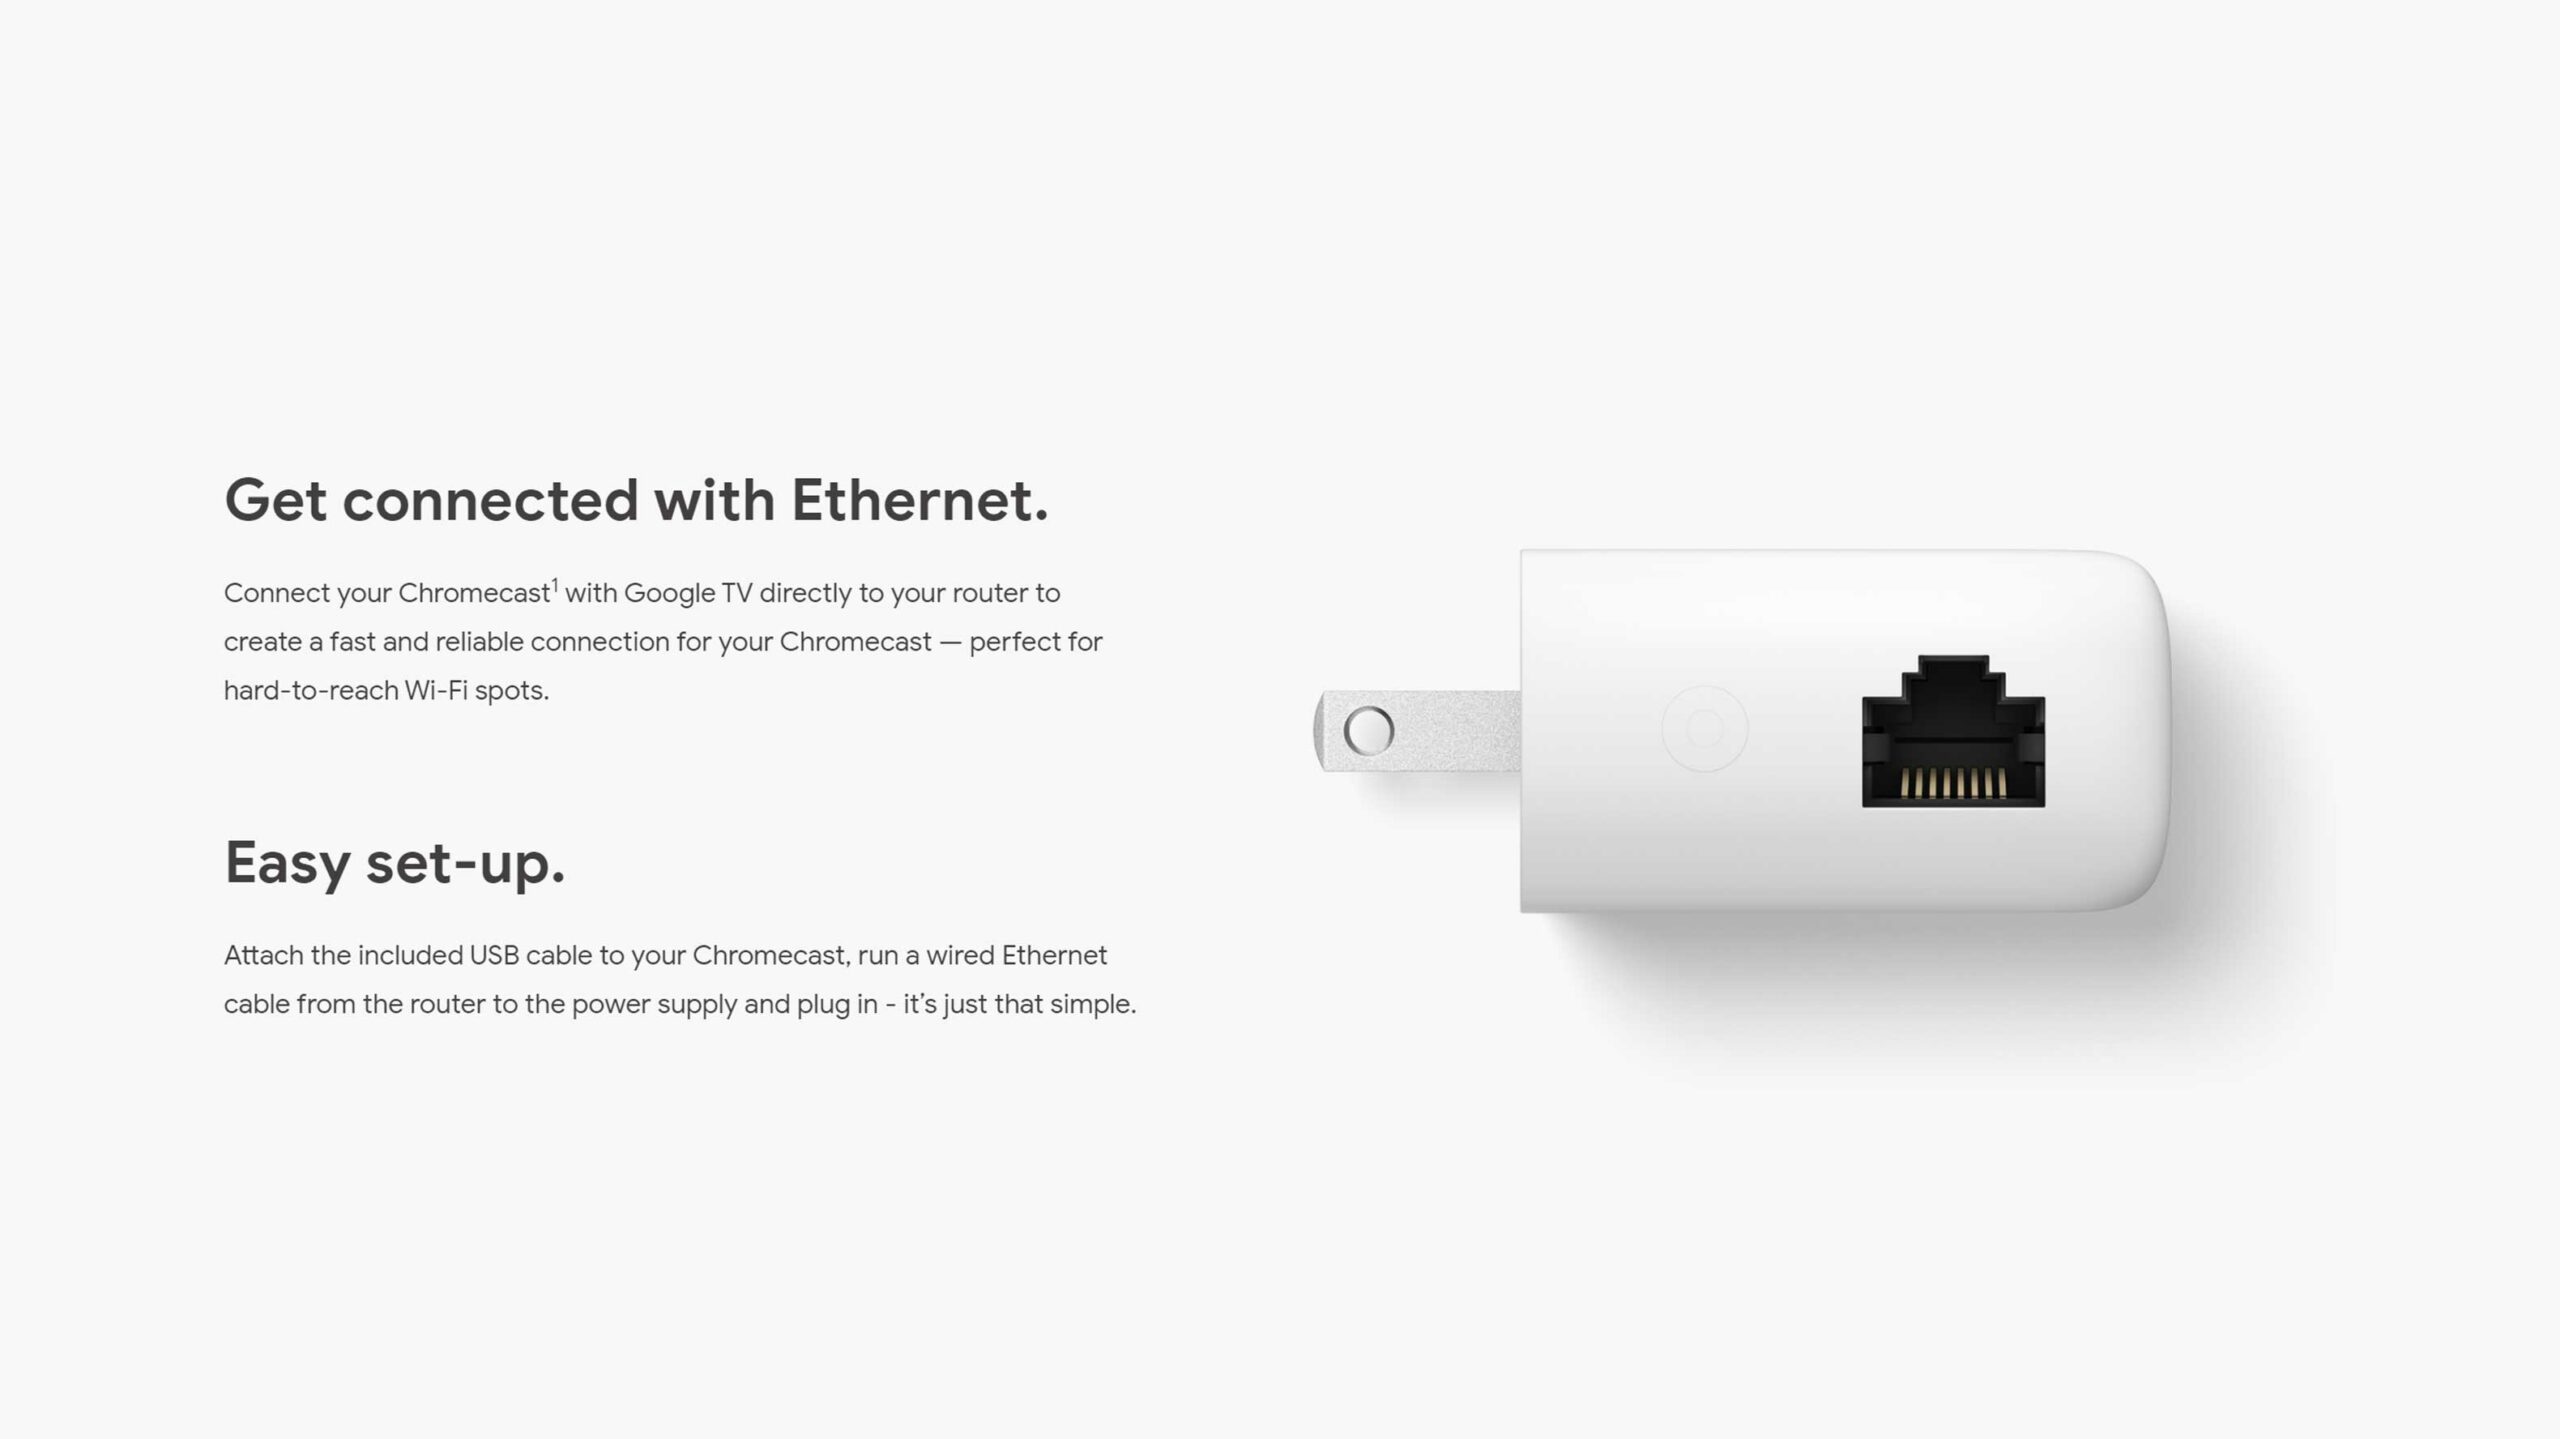 Google quietly released an Ethernet adapter for the new Chromecast